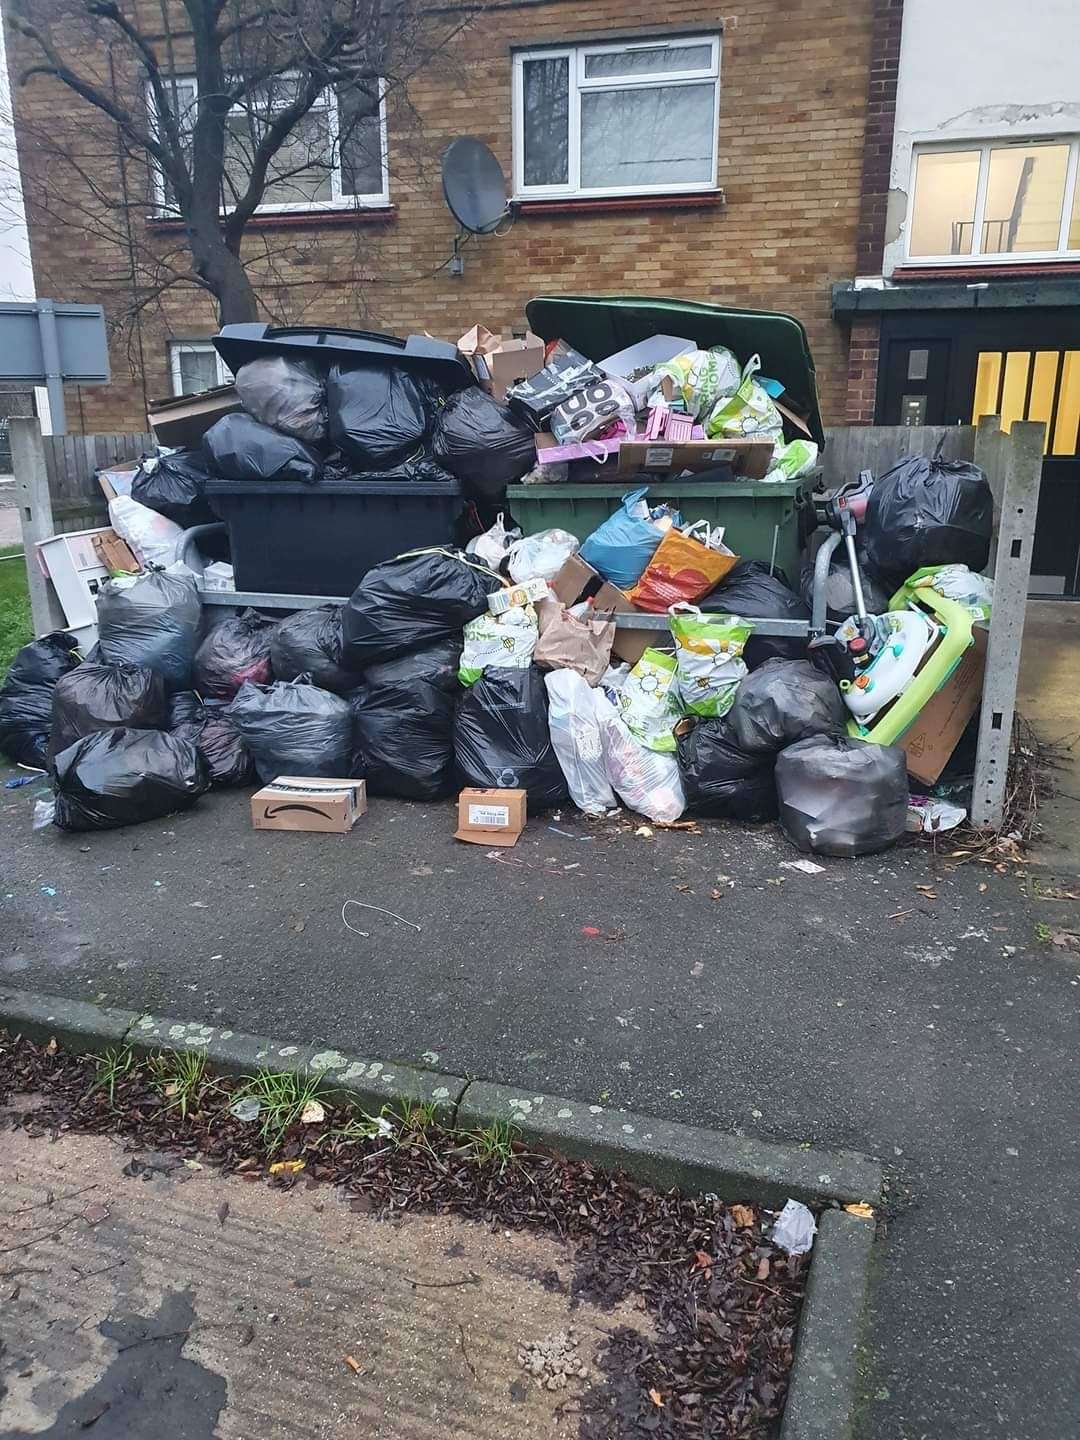 Bins found overflowing in Swanscombe, Dartford. More street rubbish has been generated during the Covid lockdowns